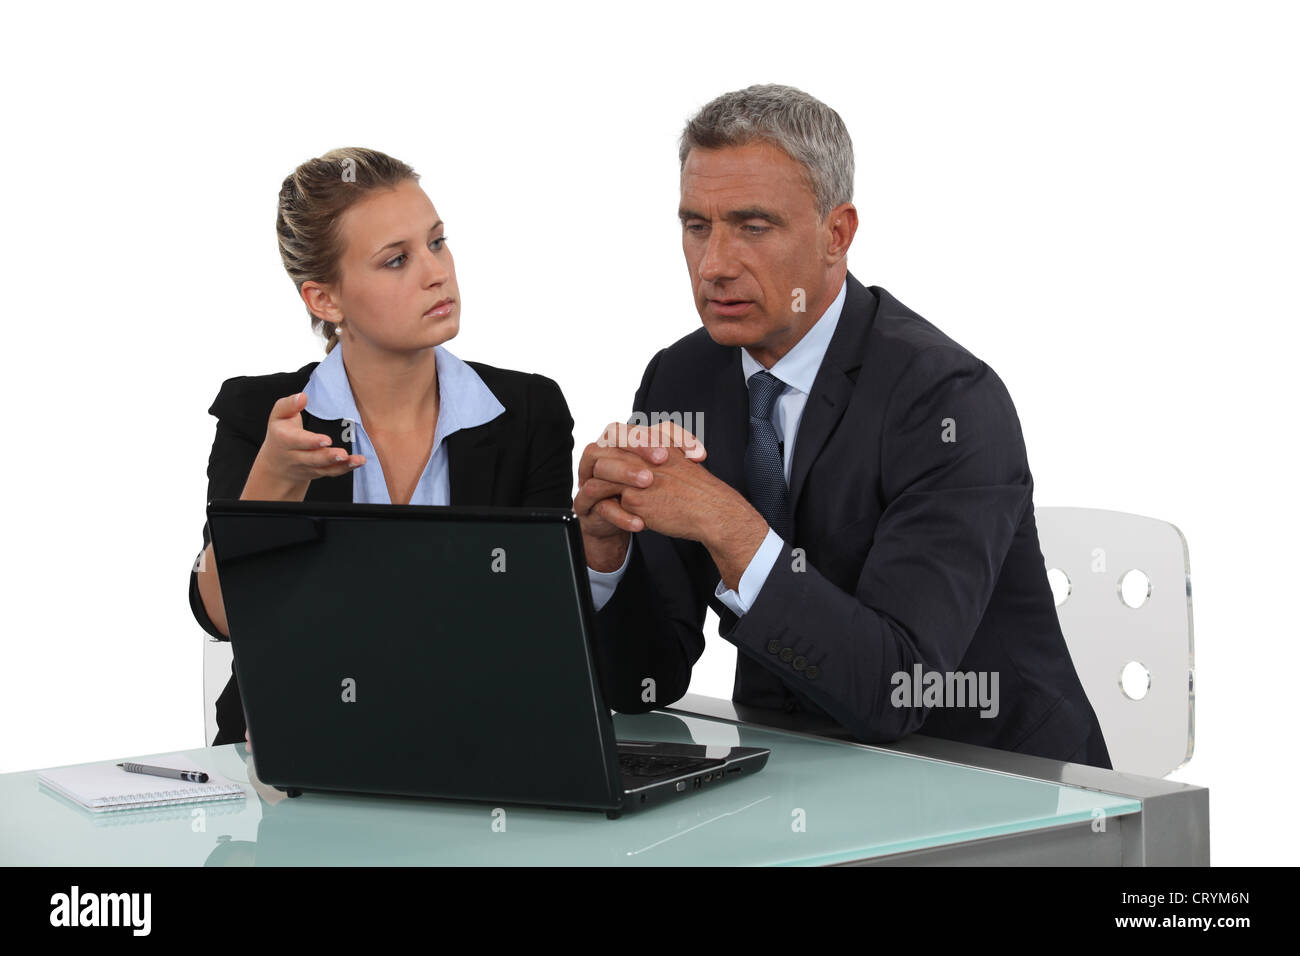 Man considering his colleague's proposal Stock Photo